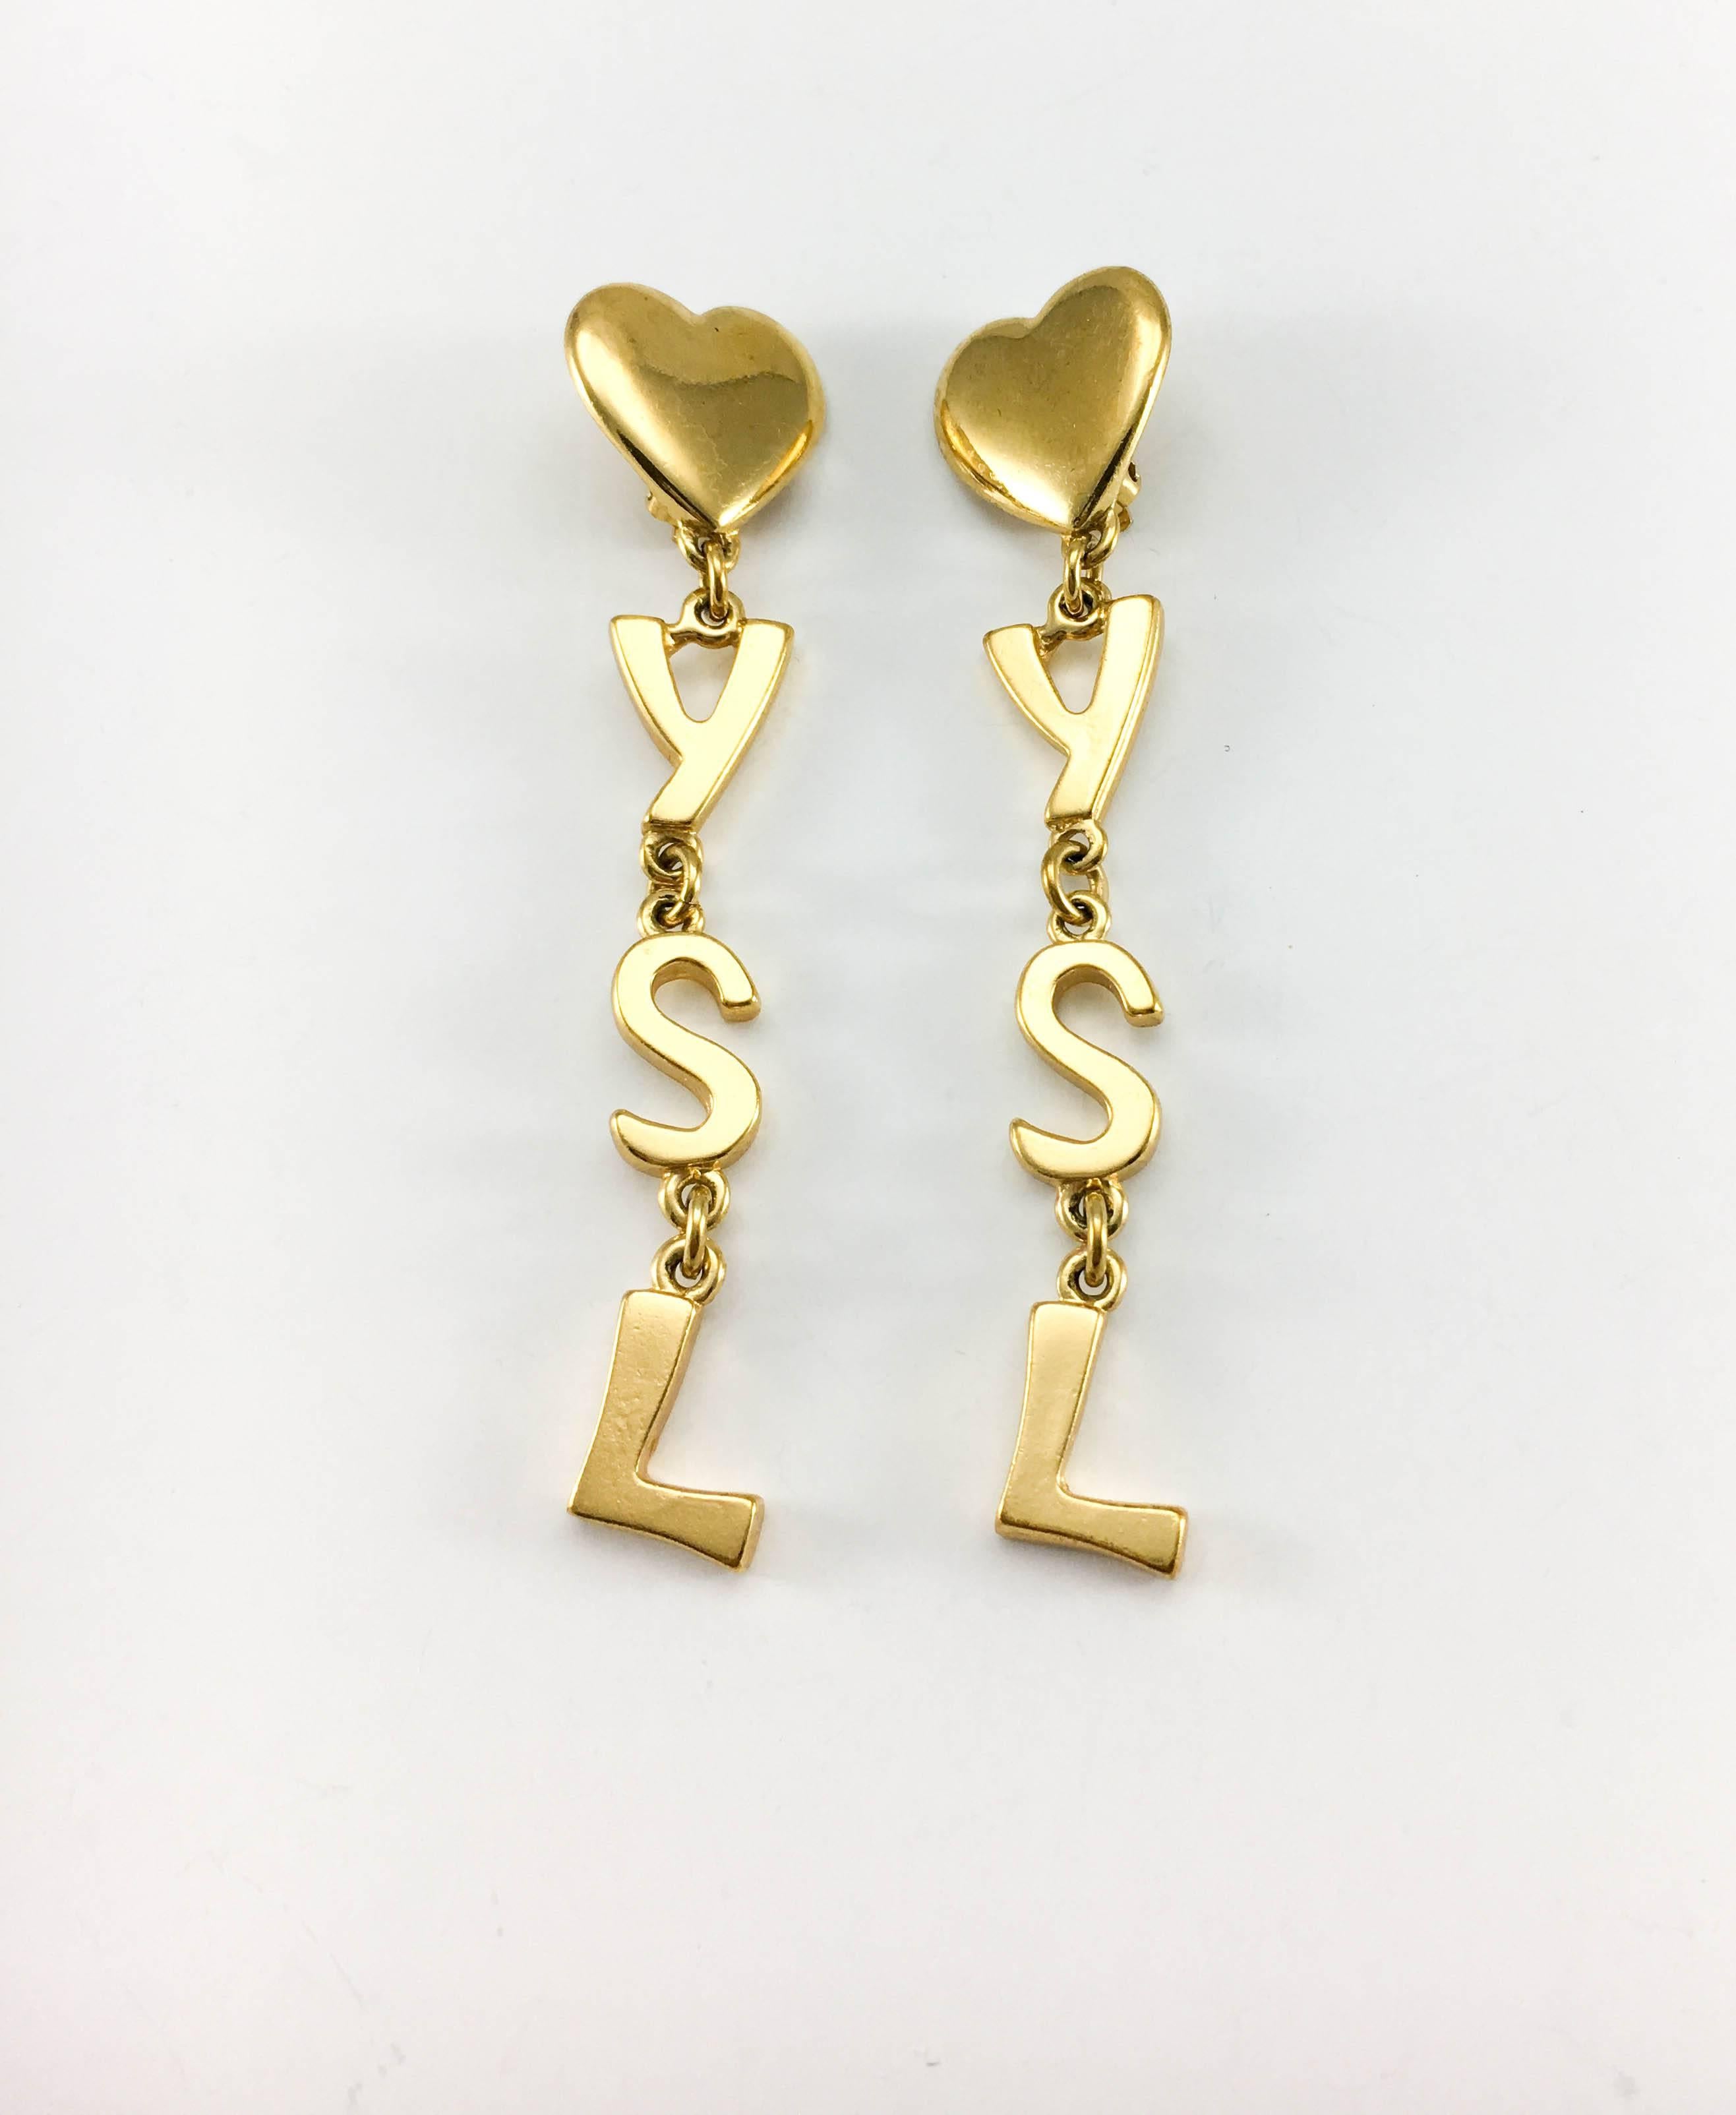 Vintage Yves Saint Laurent Dangling Clip-On Earrings. These fabulous long dangling earrings by Yves Saint Laurent date back from the 1980’s. As iconic as they can be, the design of these gold-plated earrings features the YSL letters. YSL signed and